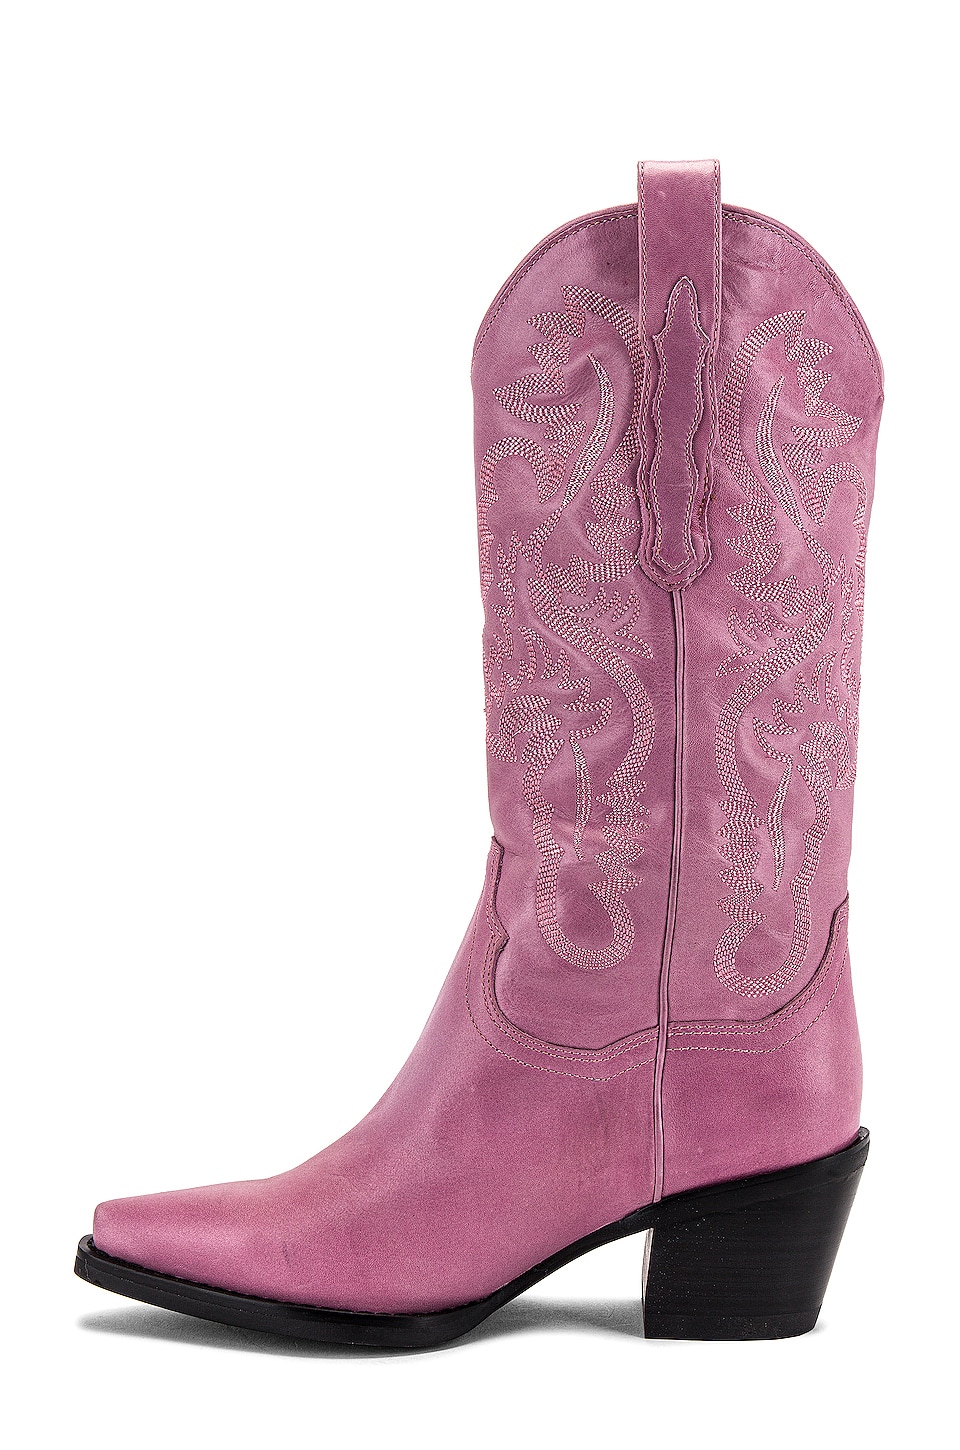 FP Collection Brayden Western Boots